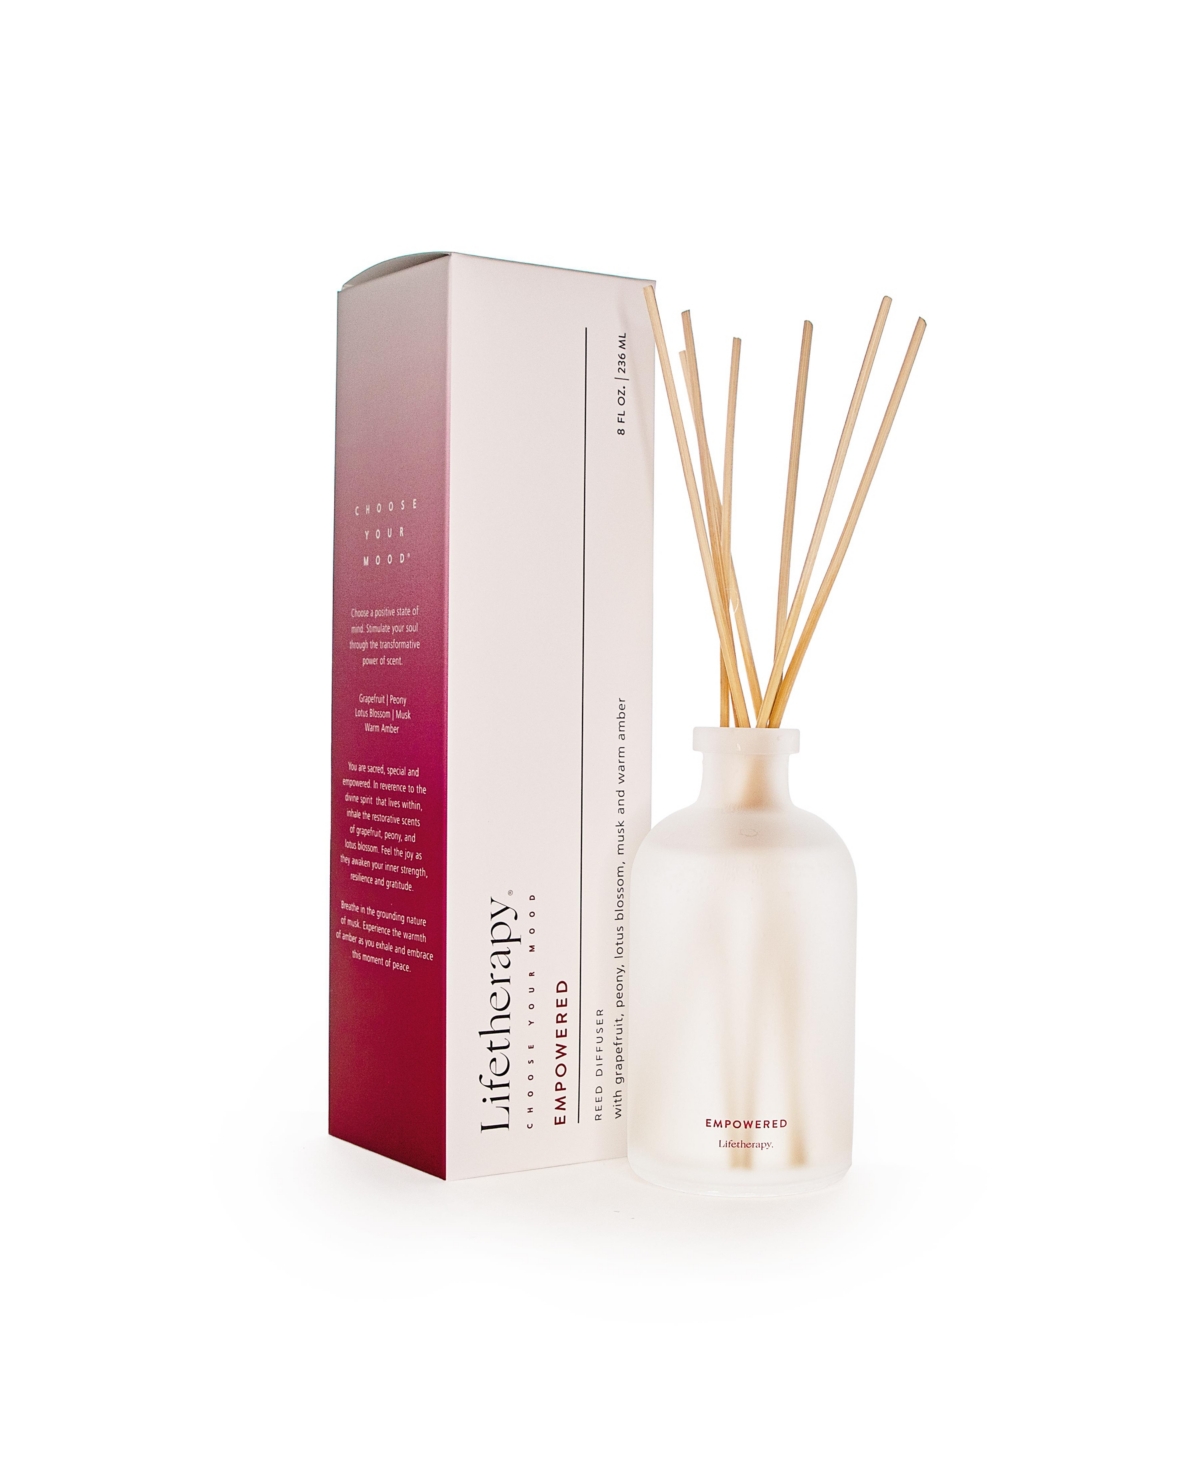 Empowered Reed Diffuser, 8 oz.